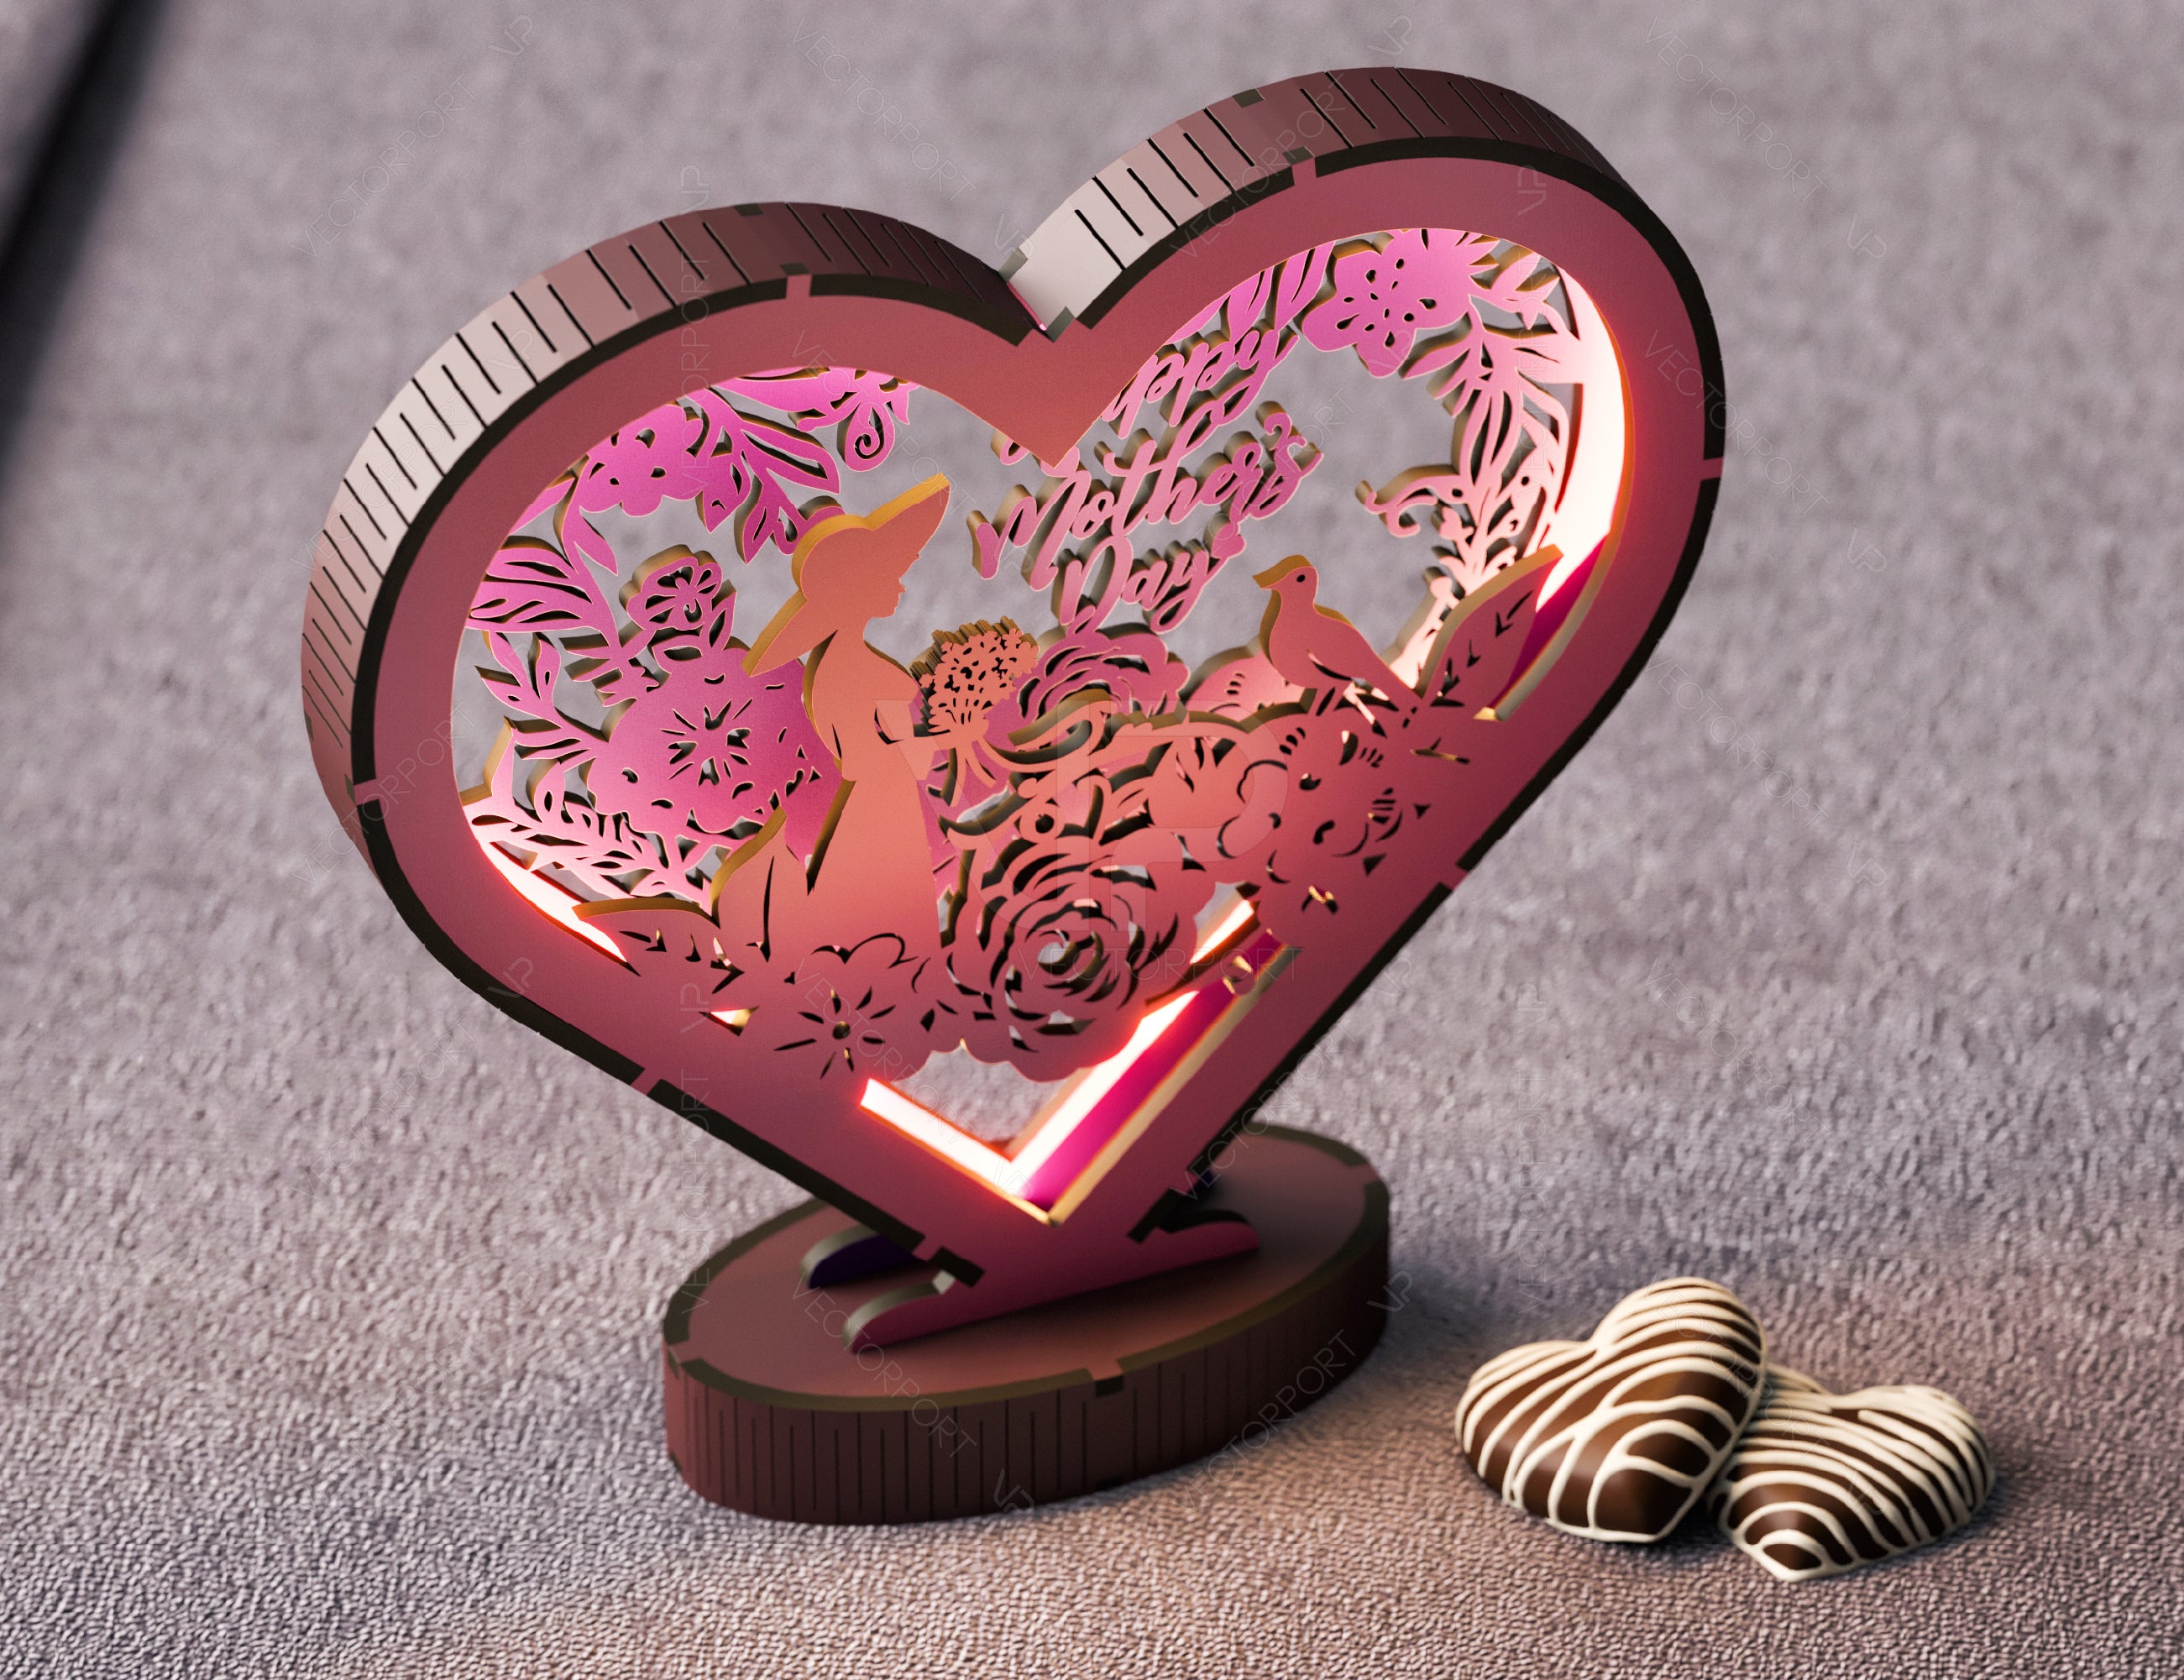 Harmony of Hearts: Artistic Table Lamp for Mother's Day 3D Led Light Laser Cut Night Lamp Heart shape Bedside Table Lamp Digital Download |#U371|